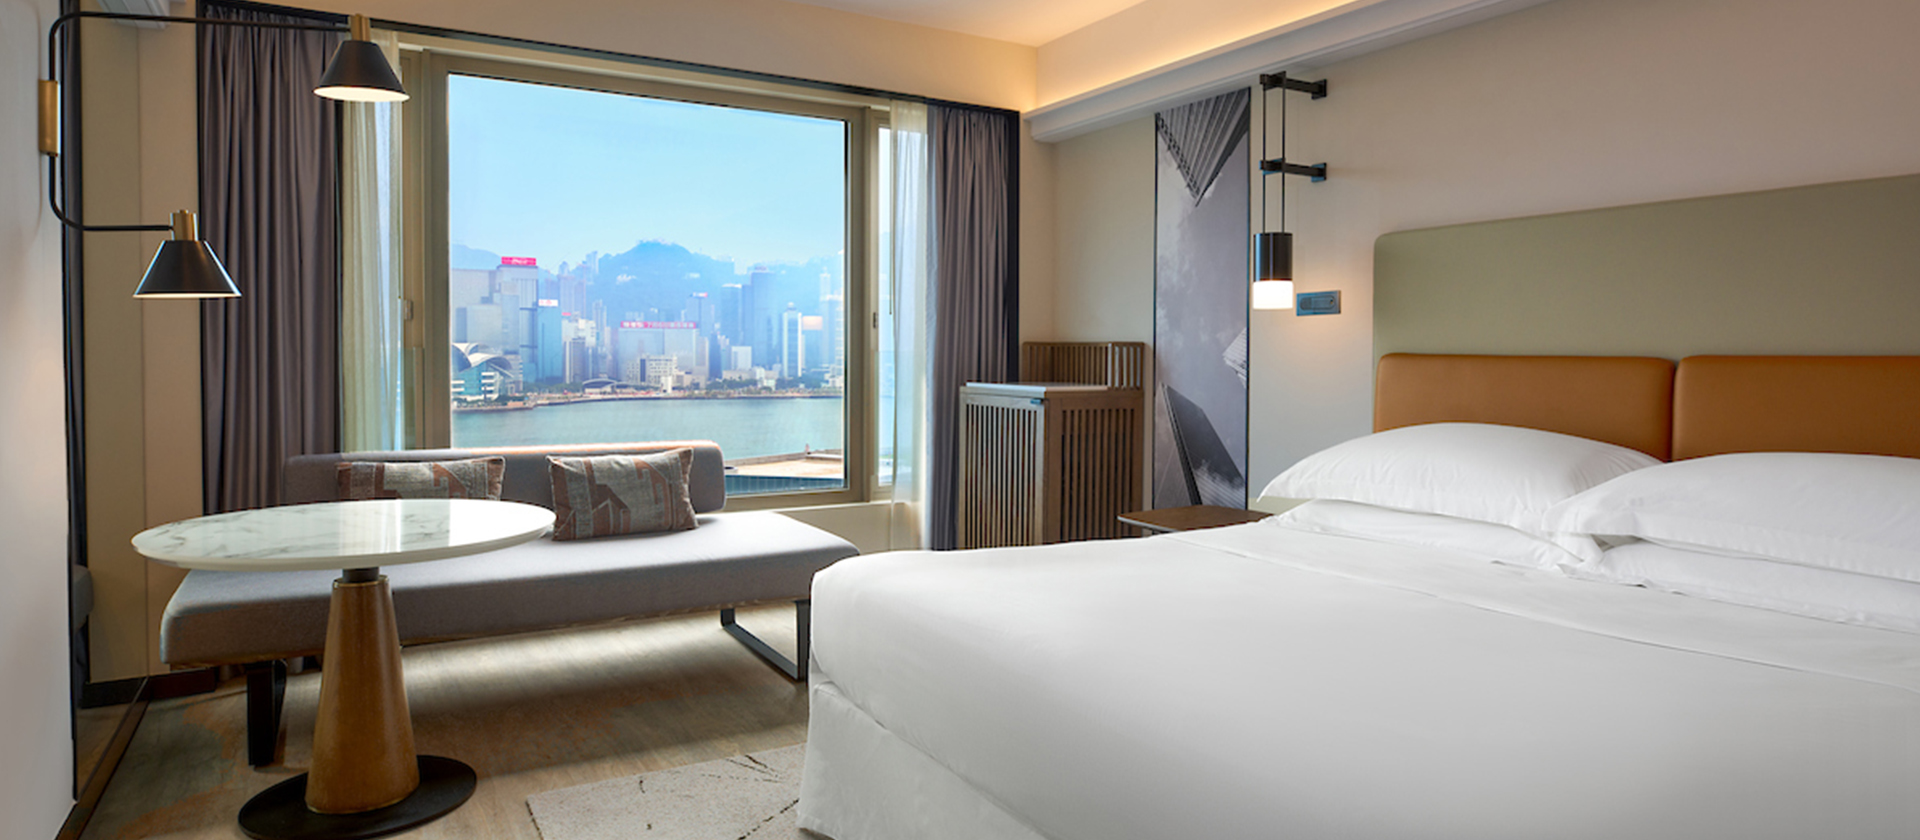 Stay in Sheraton Hong Kong Hotel & Towers with breathtaking Victoria Harbour View and enjoy Seafood Extravaganza Dinner Buffet for two